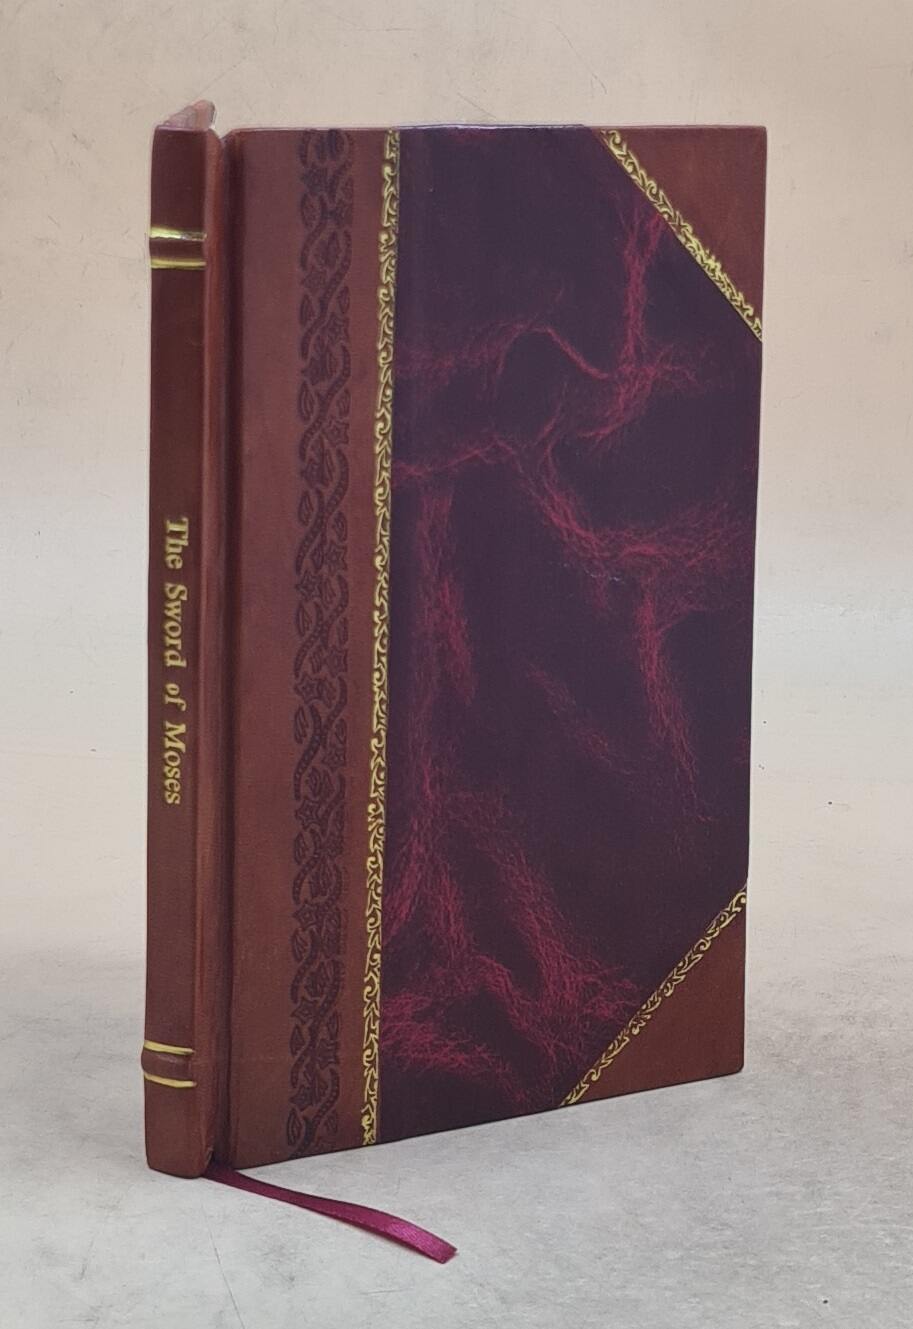 Primary image for The Sword Of Moses An Ancient Hebrew / Aramaic Book Of Magic Fro [Leather Bound]